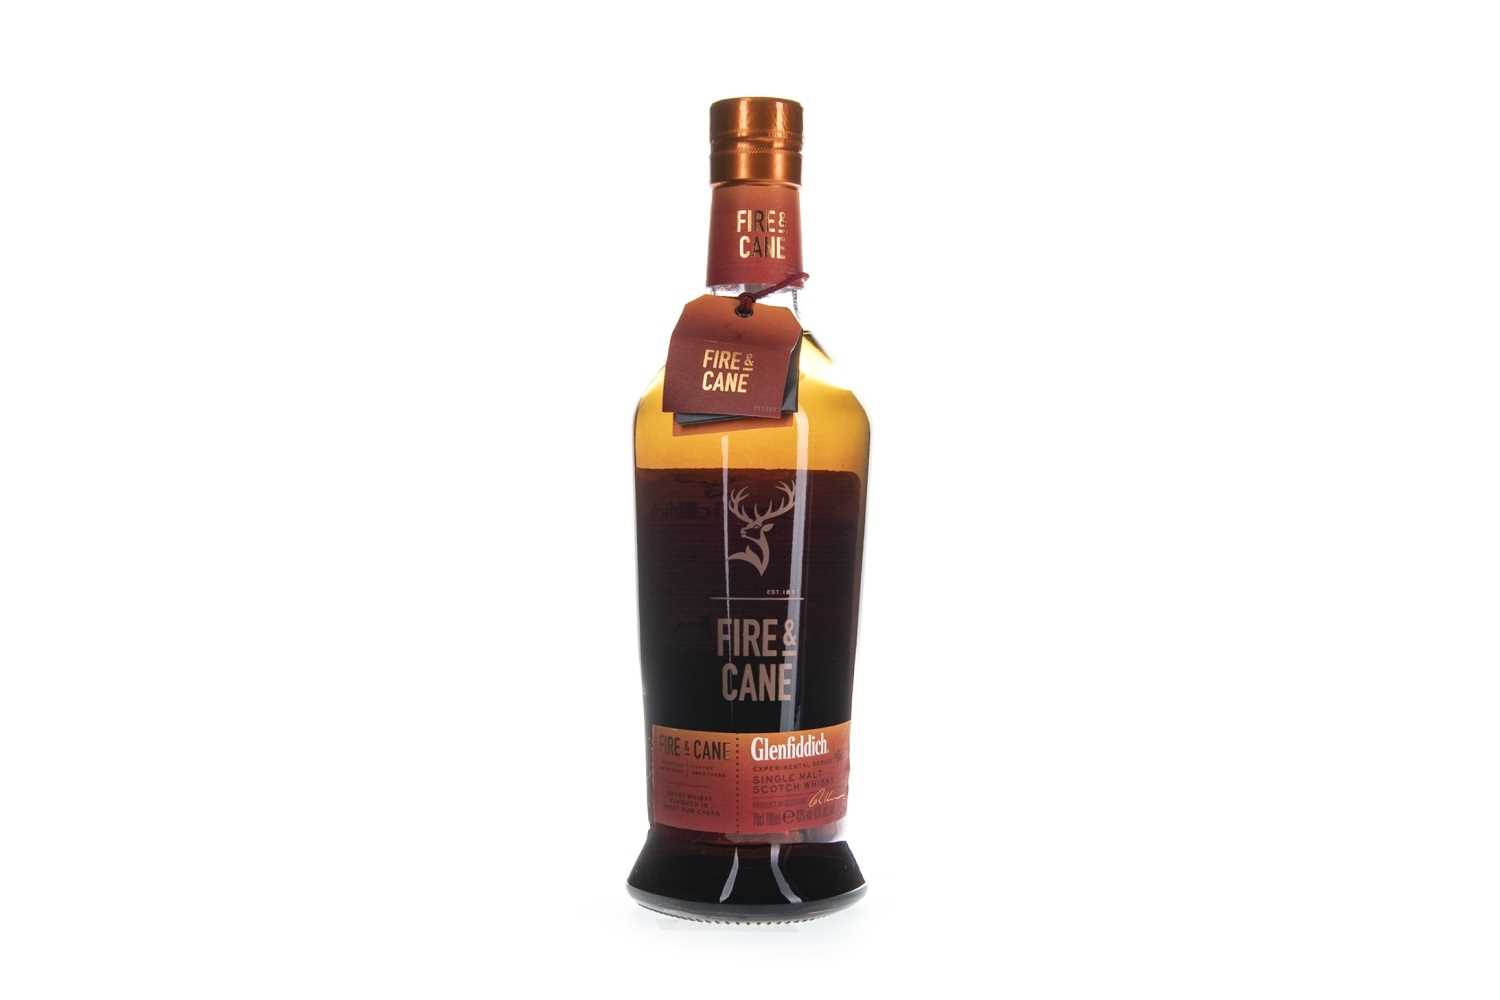 Lot 301 - GLENFIDDICH EXPERIMENTAL SERIES #4 FIRE AND CANE